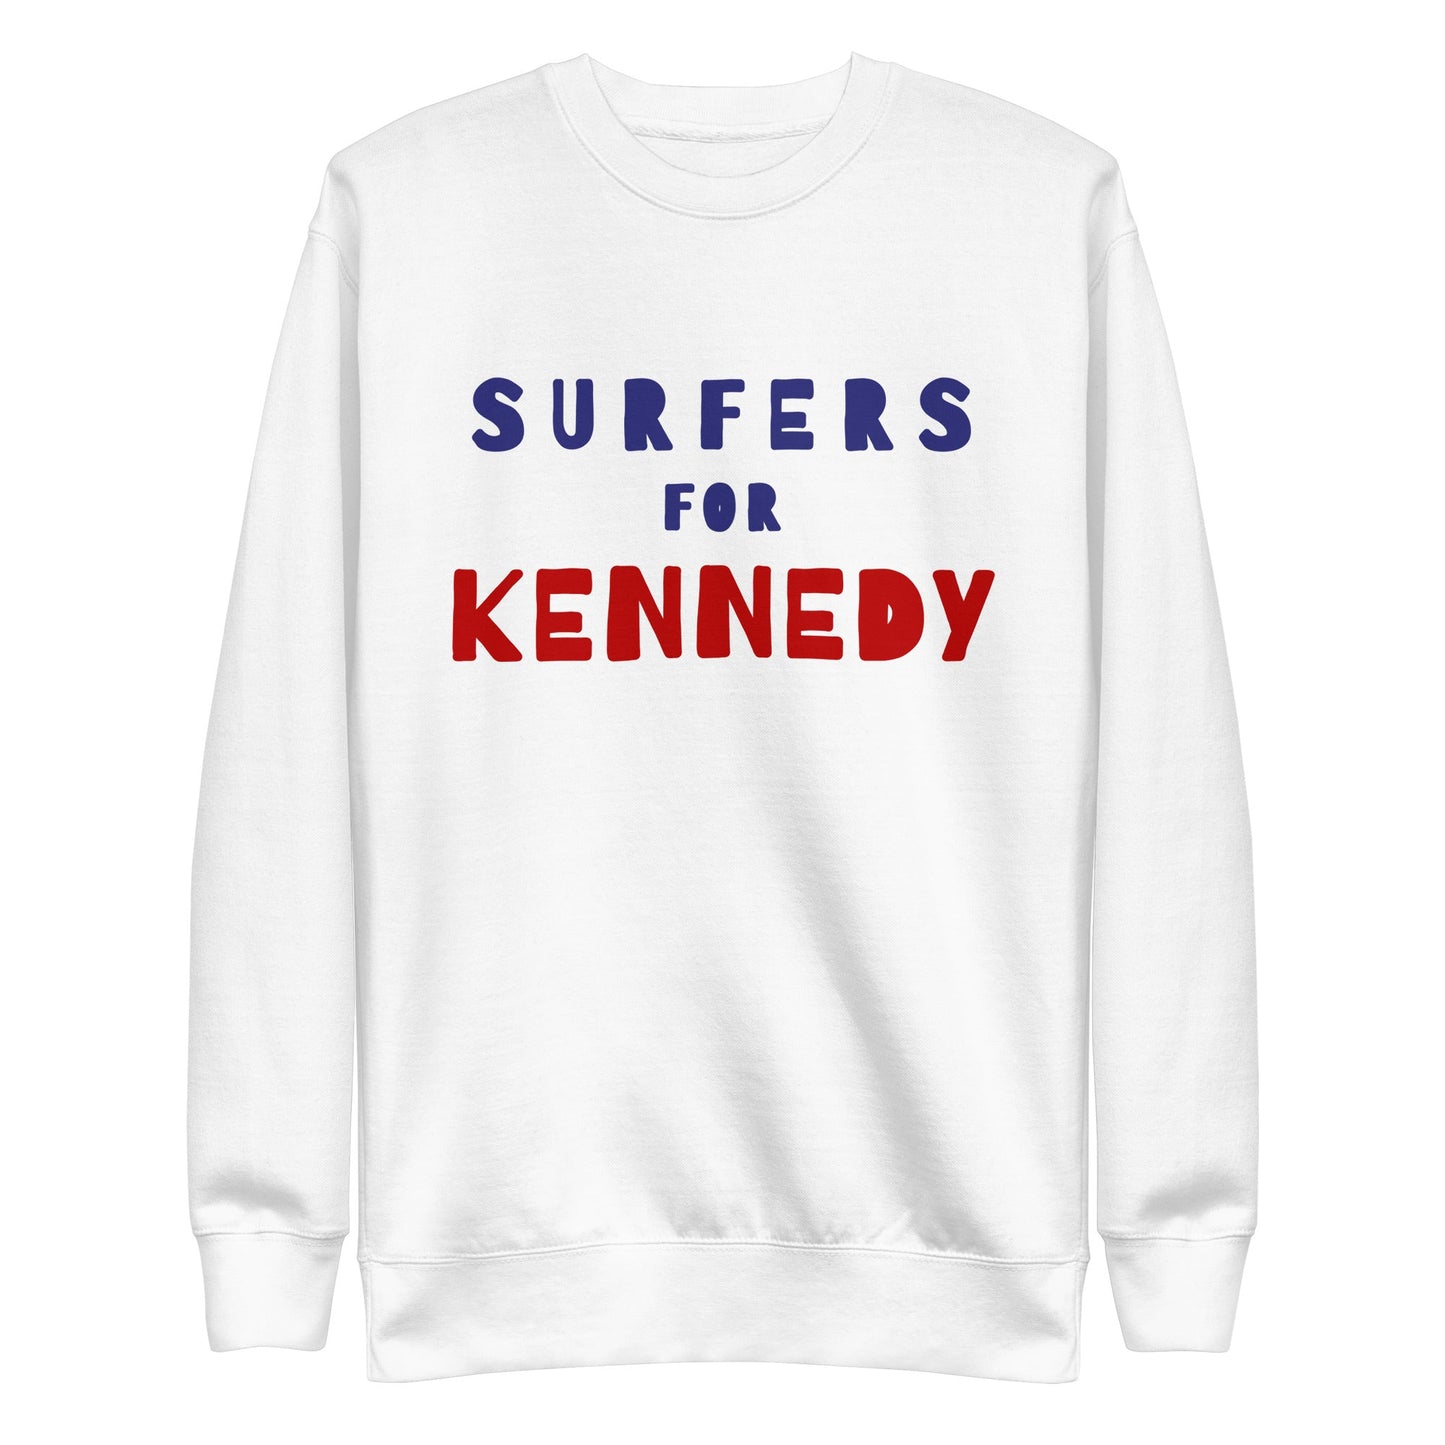 Surfers for Kennedy Unisex Premium Sweatshirt - TEAM KENNEDY. All rights reserved